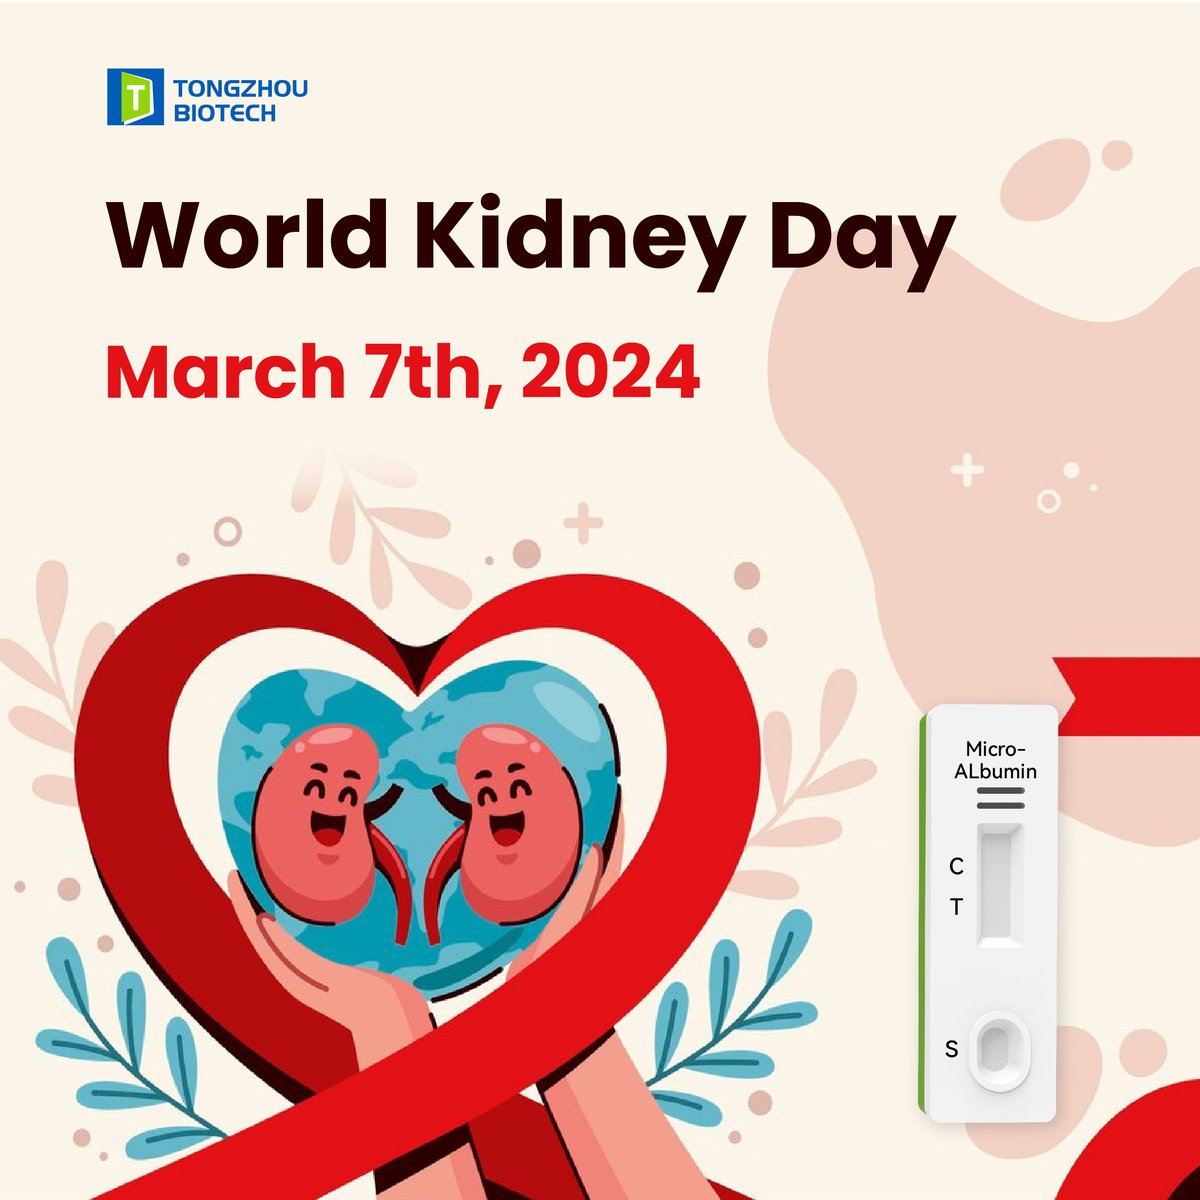 🎈#WorldKidneyDay is a global health awareness campaign celebrated annually on the second Thursday of March. Its primary goal is to raise awareness about the importance of #KidneyHealth and the risk factors for #KidneyDiseases.
#MicroAlbumin #RapidTest #IVD #diagnosis #medical